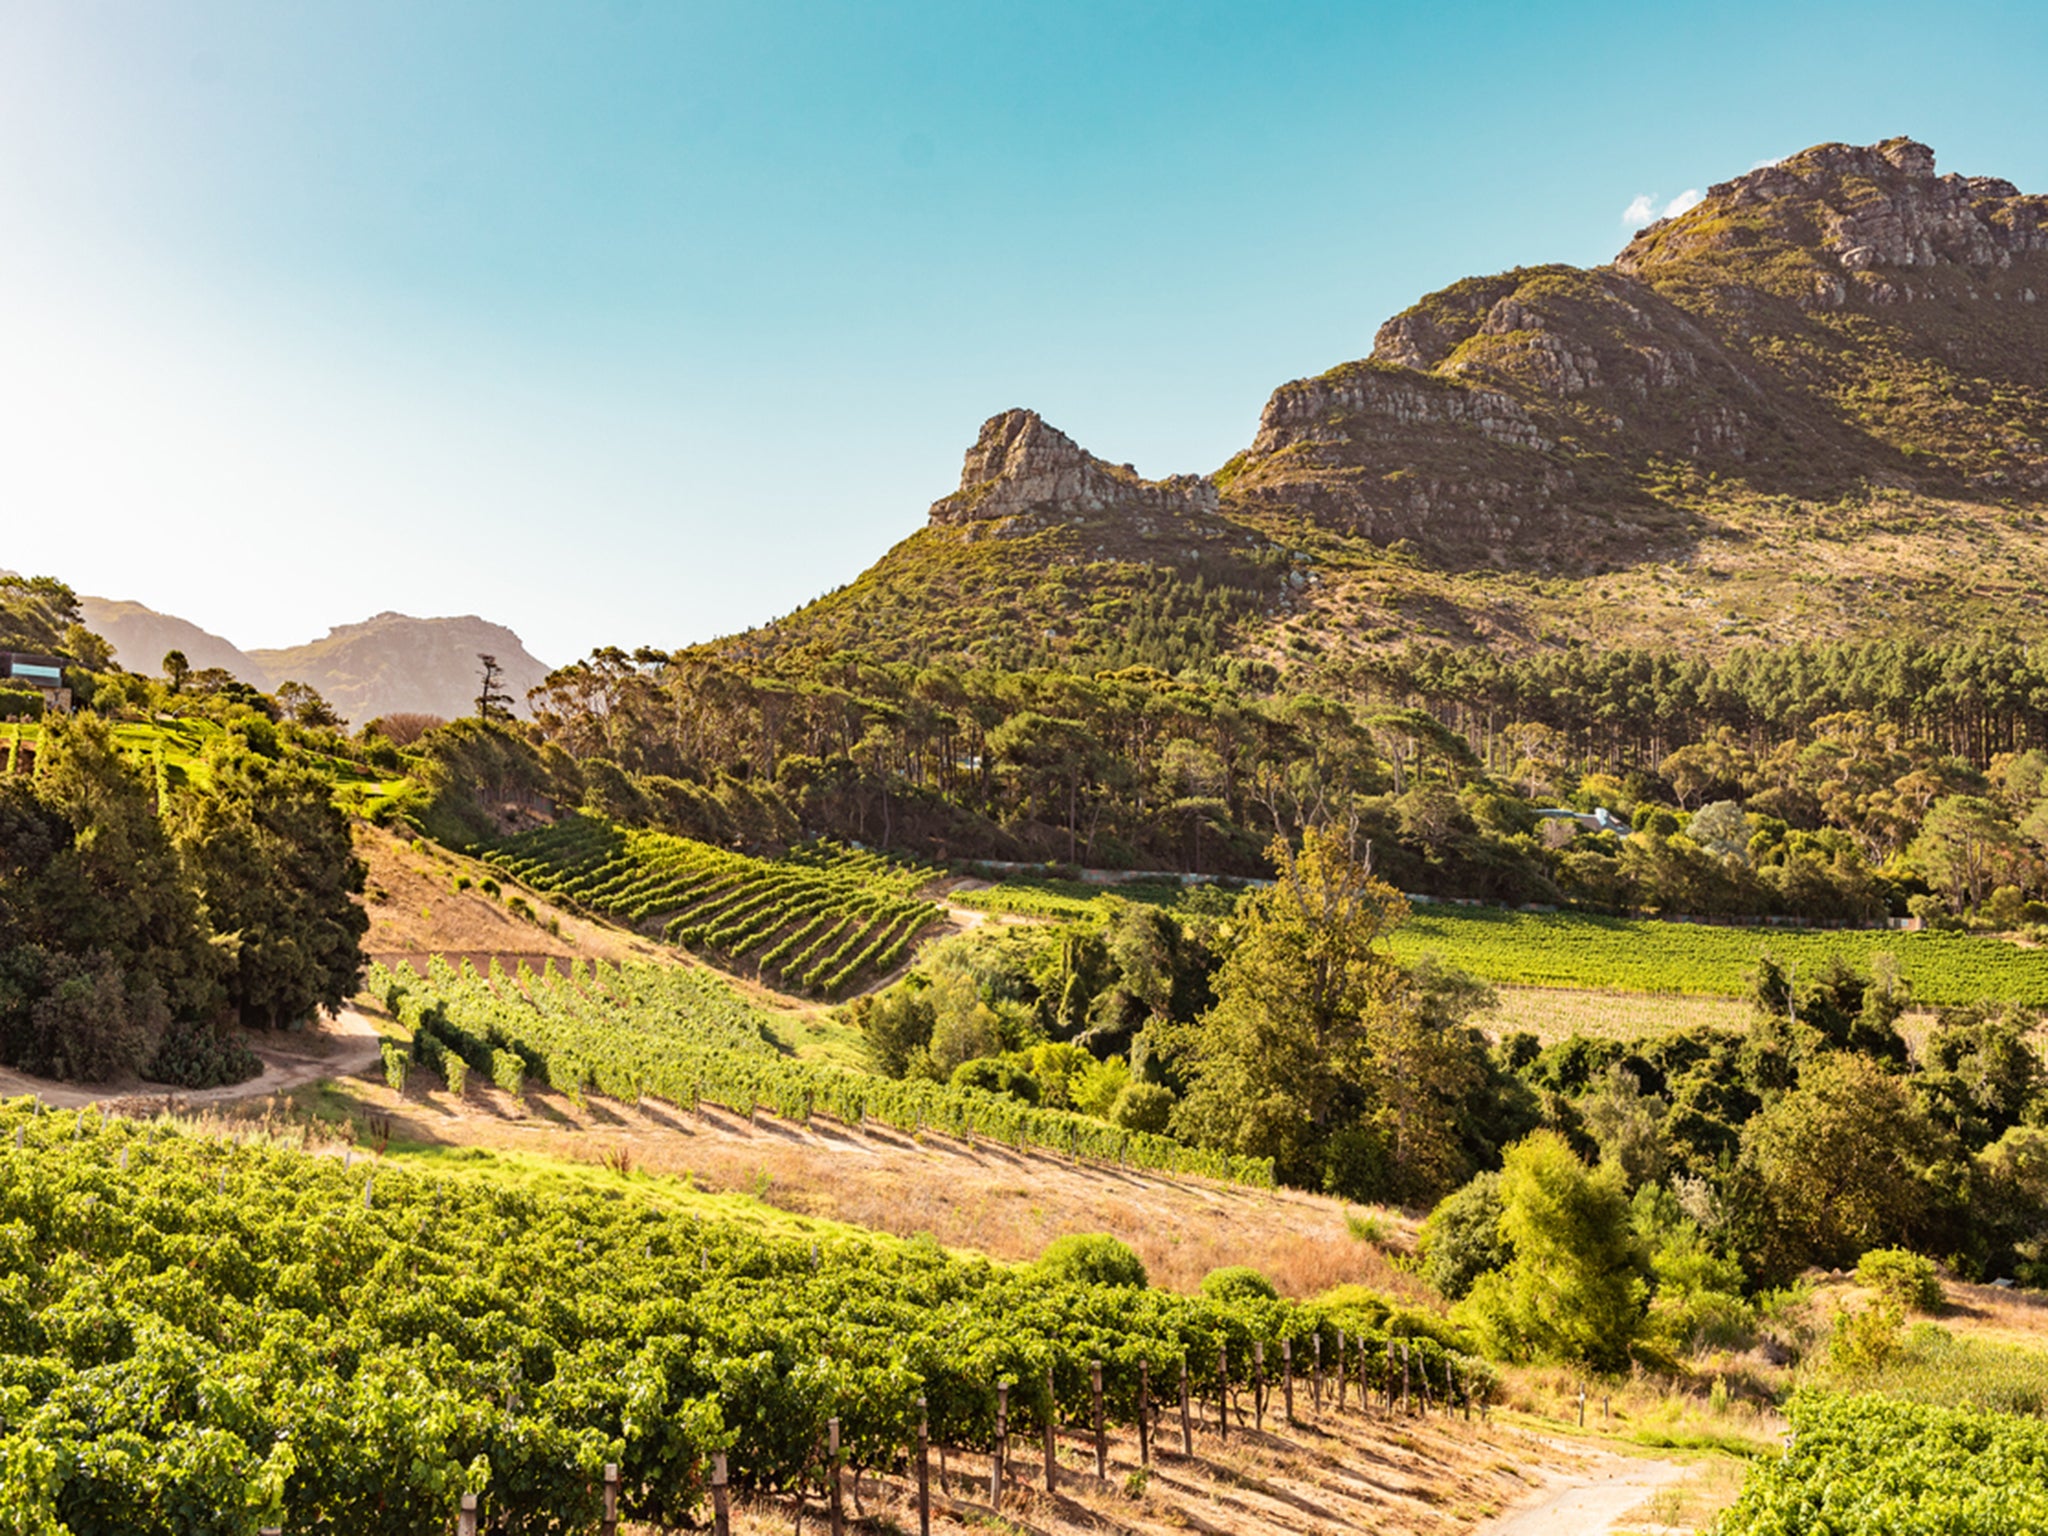 With myriad climates and soil types, South Africa produces some of the finest wines in the world